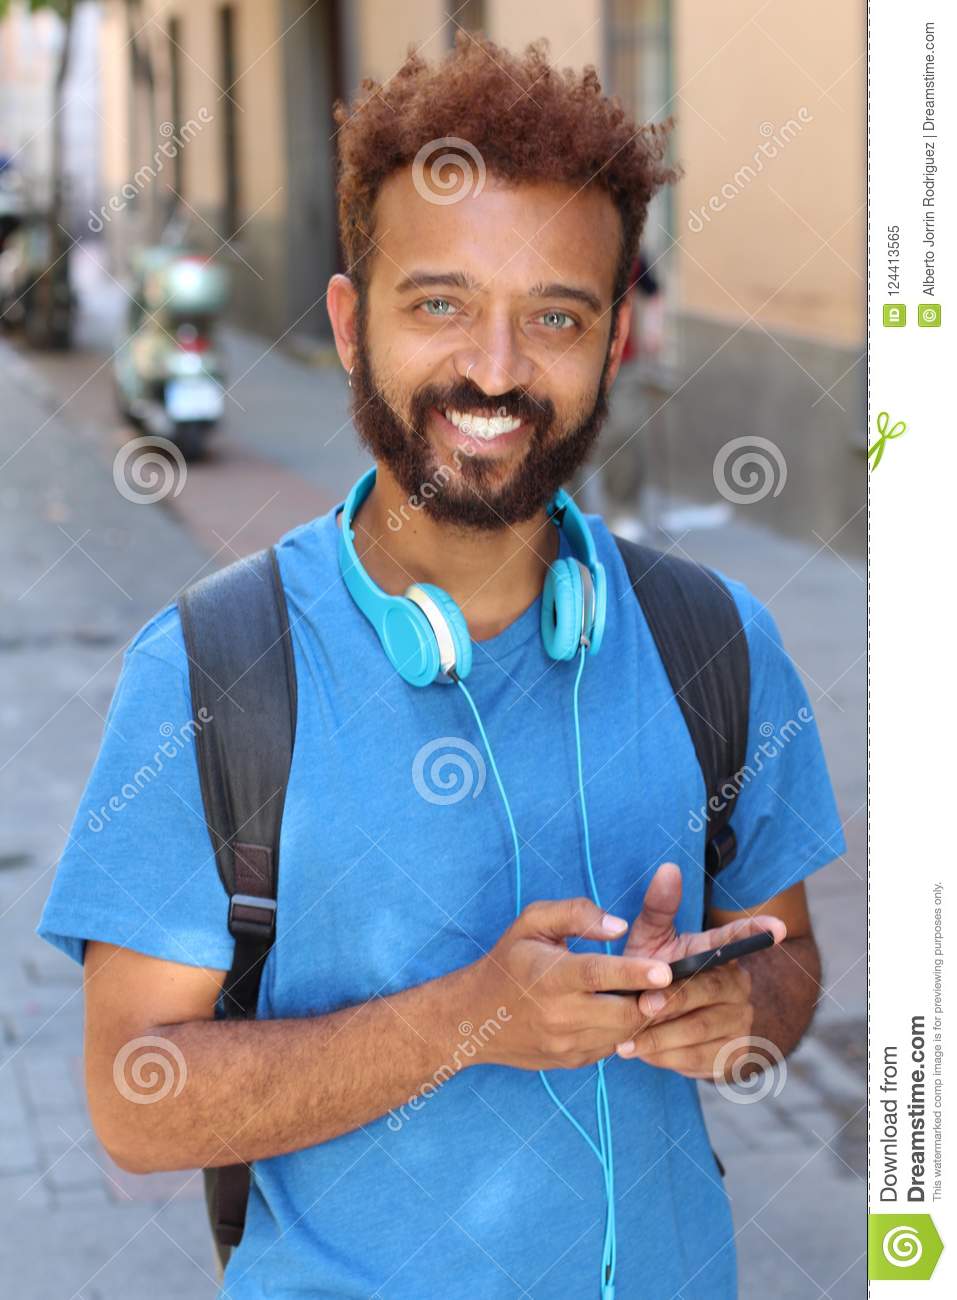 mixed-race-guy-smiling-outdoors-124413565.jpg